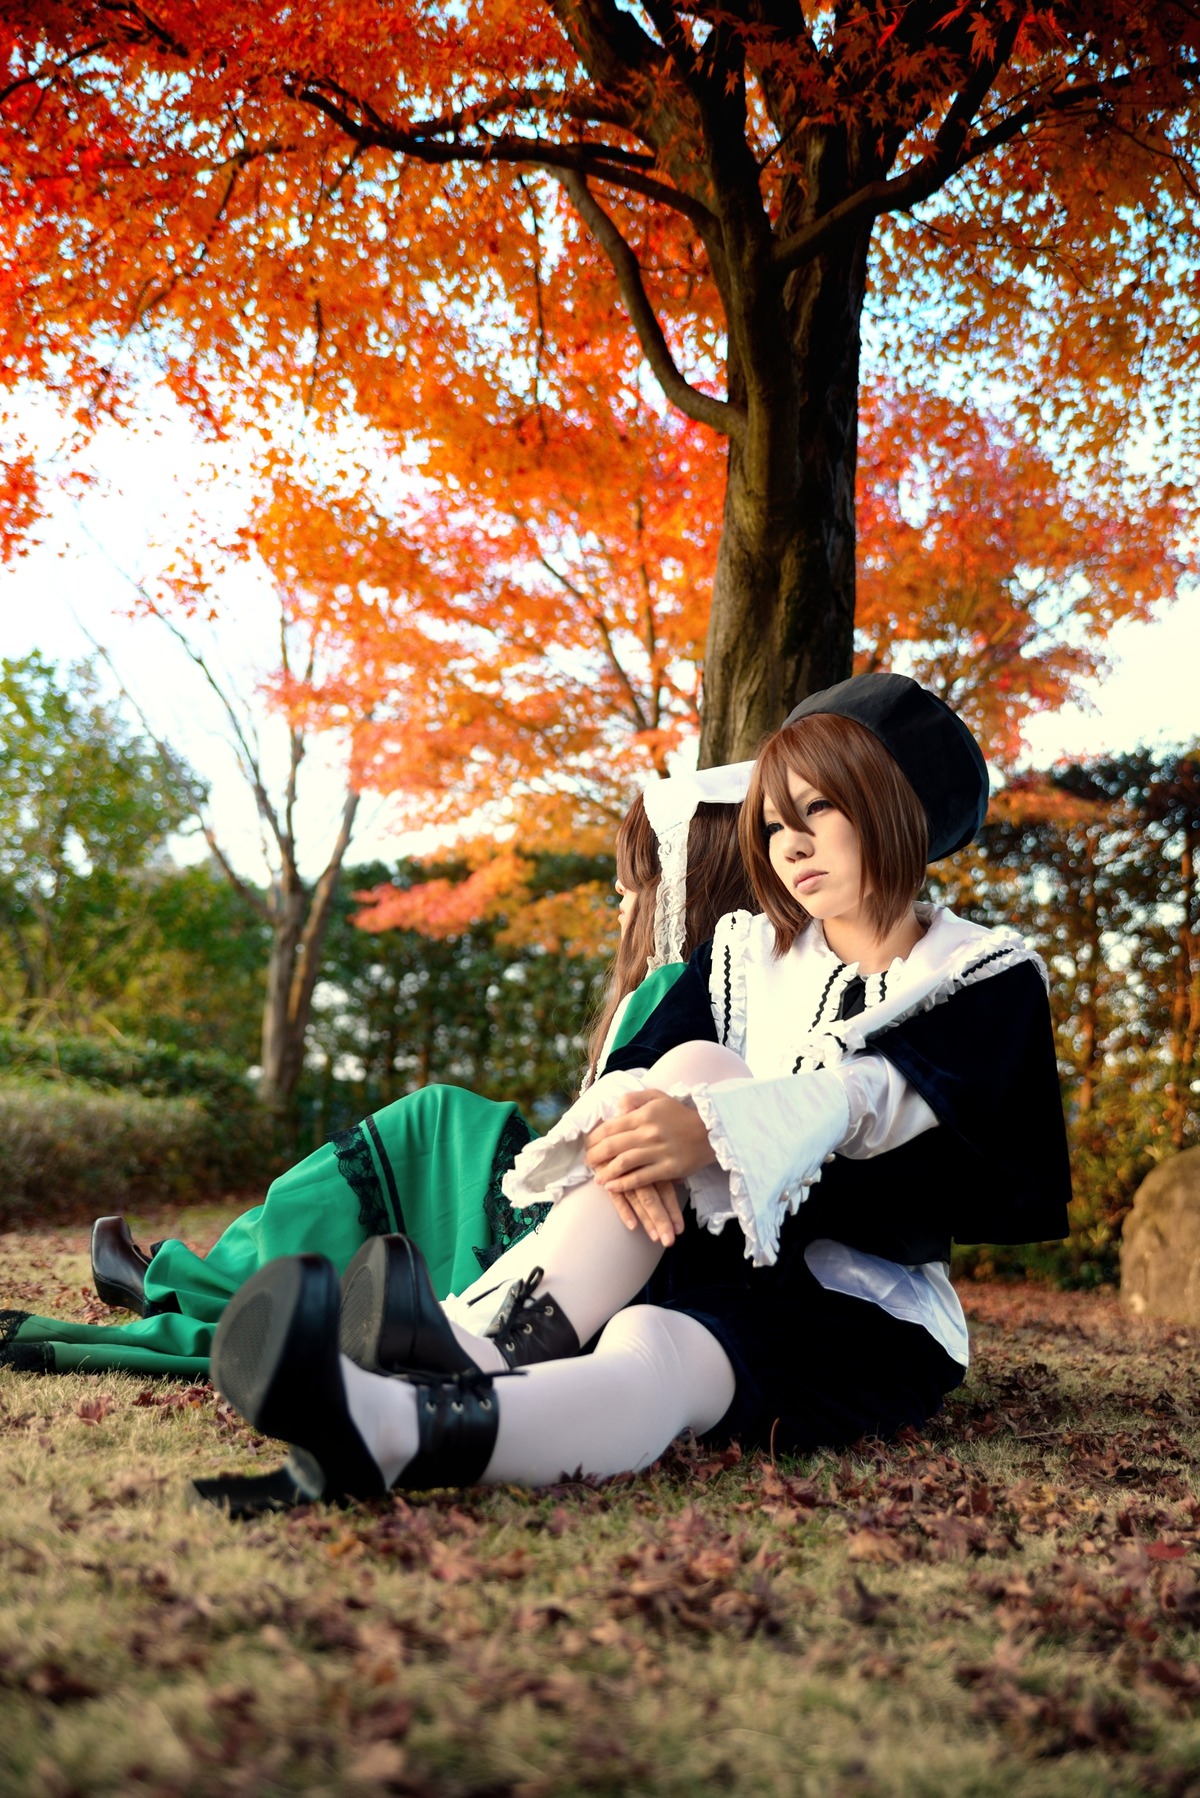 1girl autumn autumn_leaves brown_hair closed_eyes day falling_leaves hat leaf maple_leaf nature on_ground outdoors short_hair sitting solo souseiseki tree